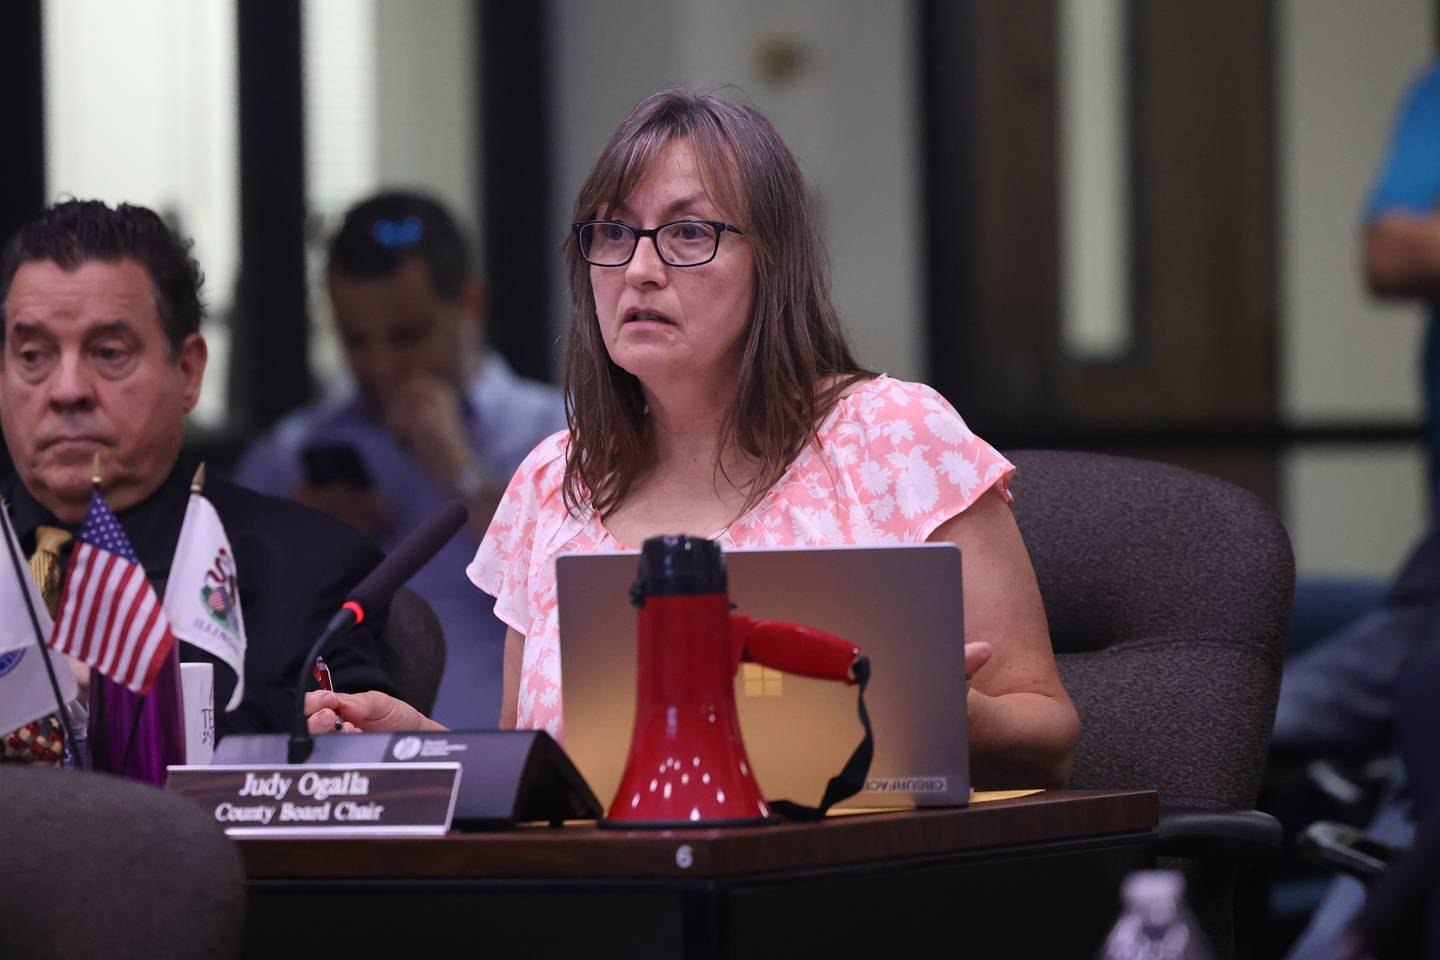 Will County board member Judie Ogalla speaks at the Will County board meeting on Thursday, Aug. 17, 2023 in Joliet.